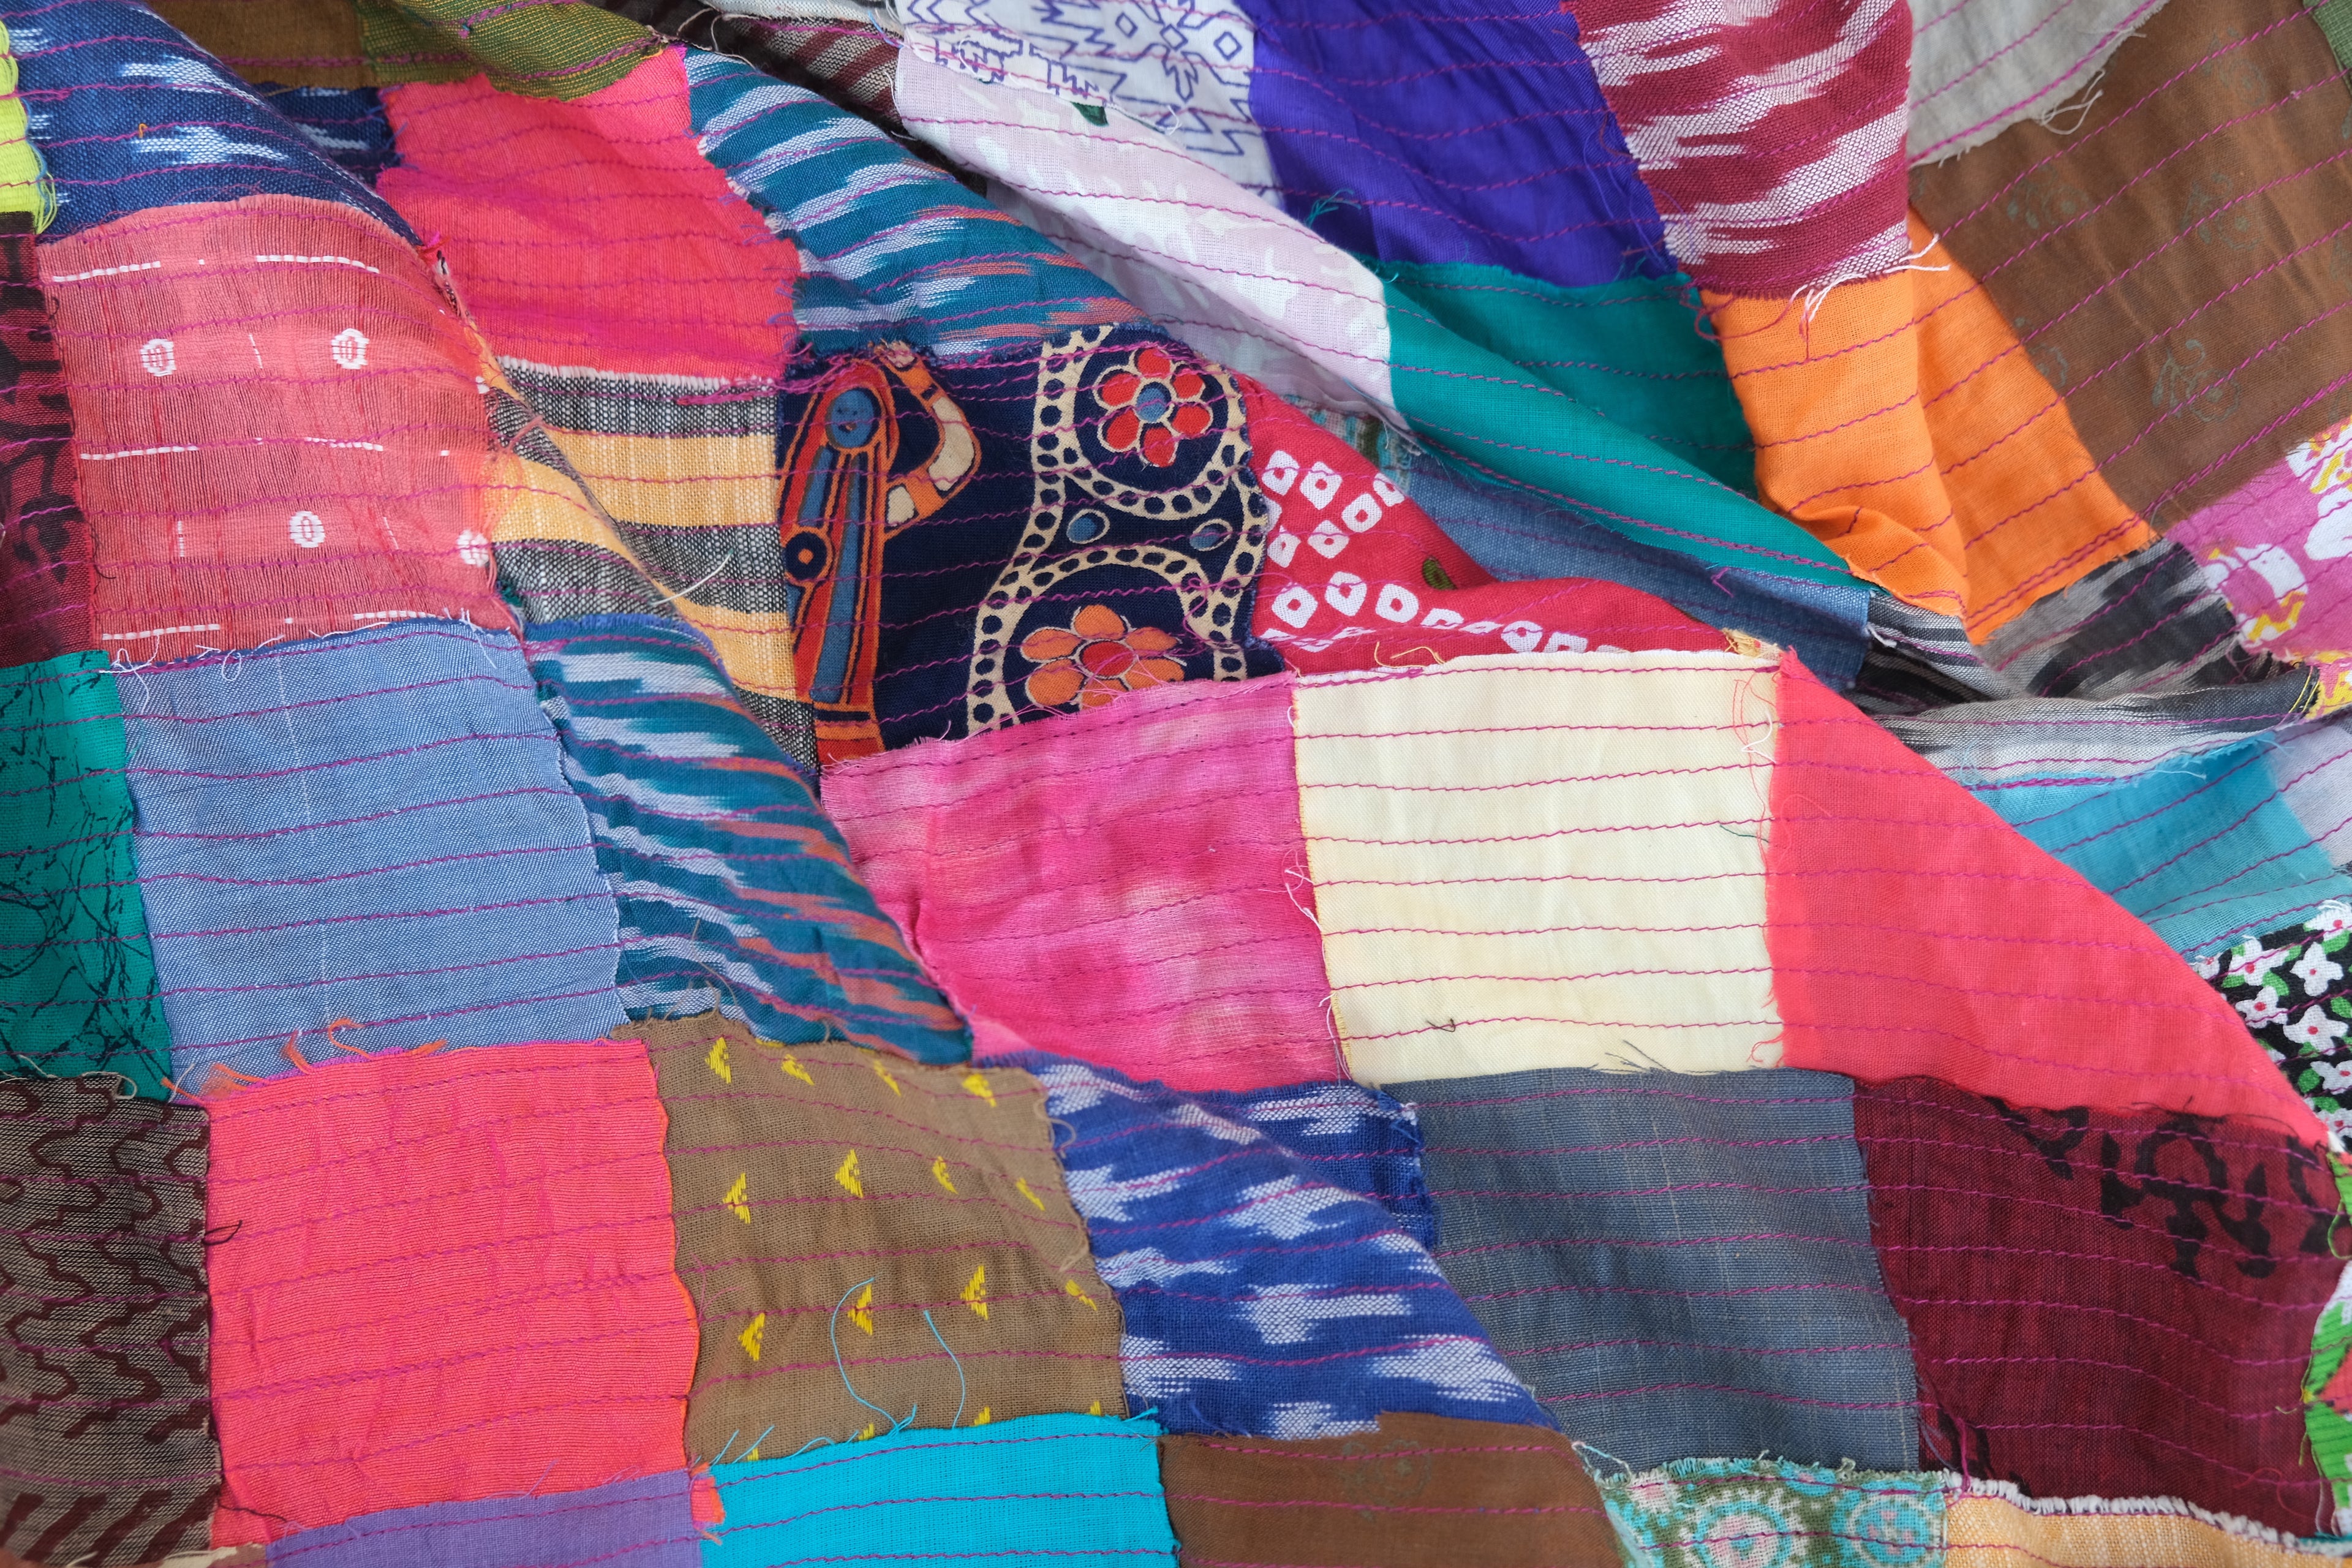 Meet our wonderful partners who share our love for fabric scrap upcycling at Oh Scrap Madras!